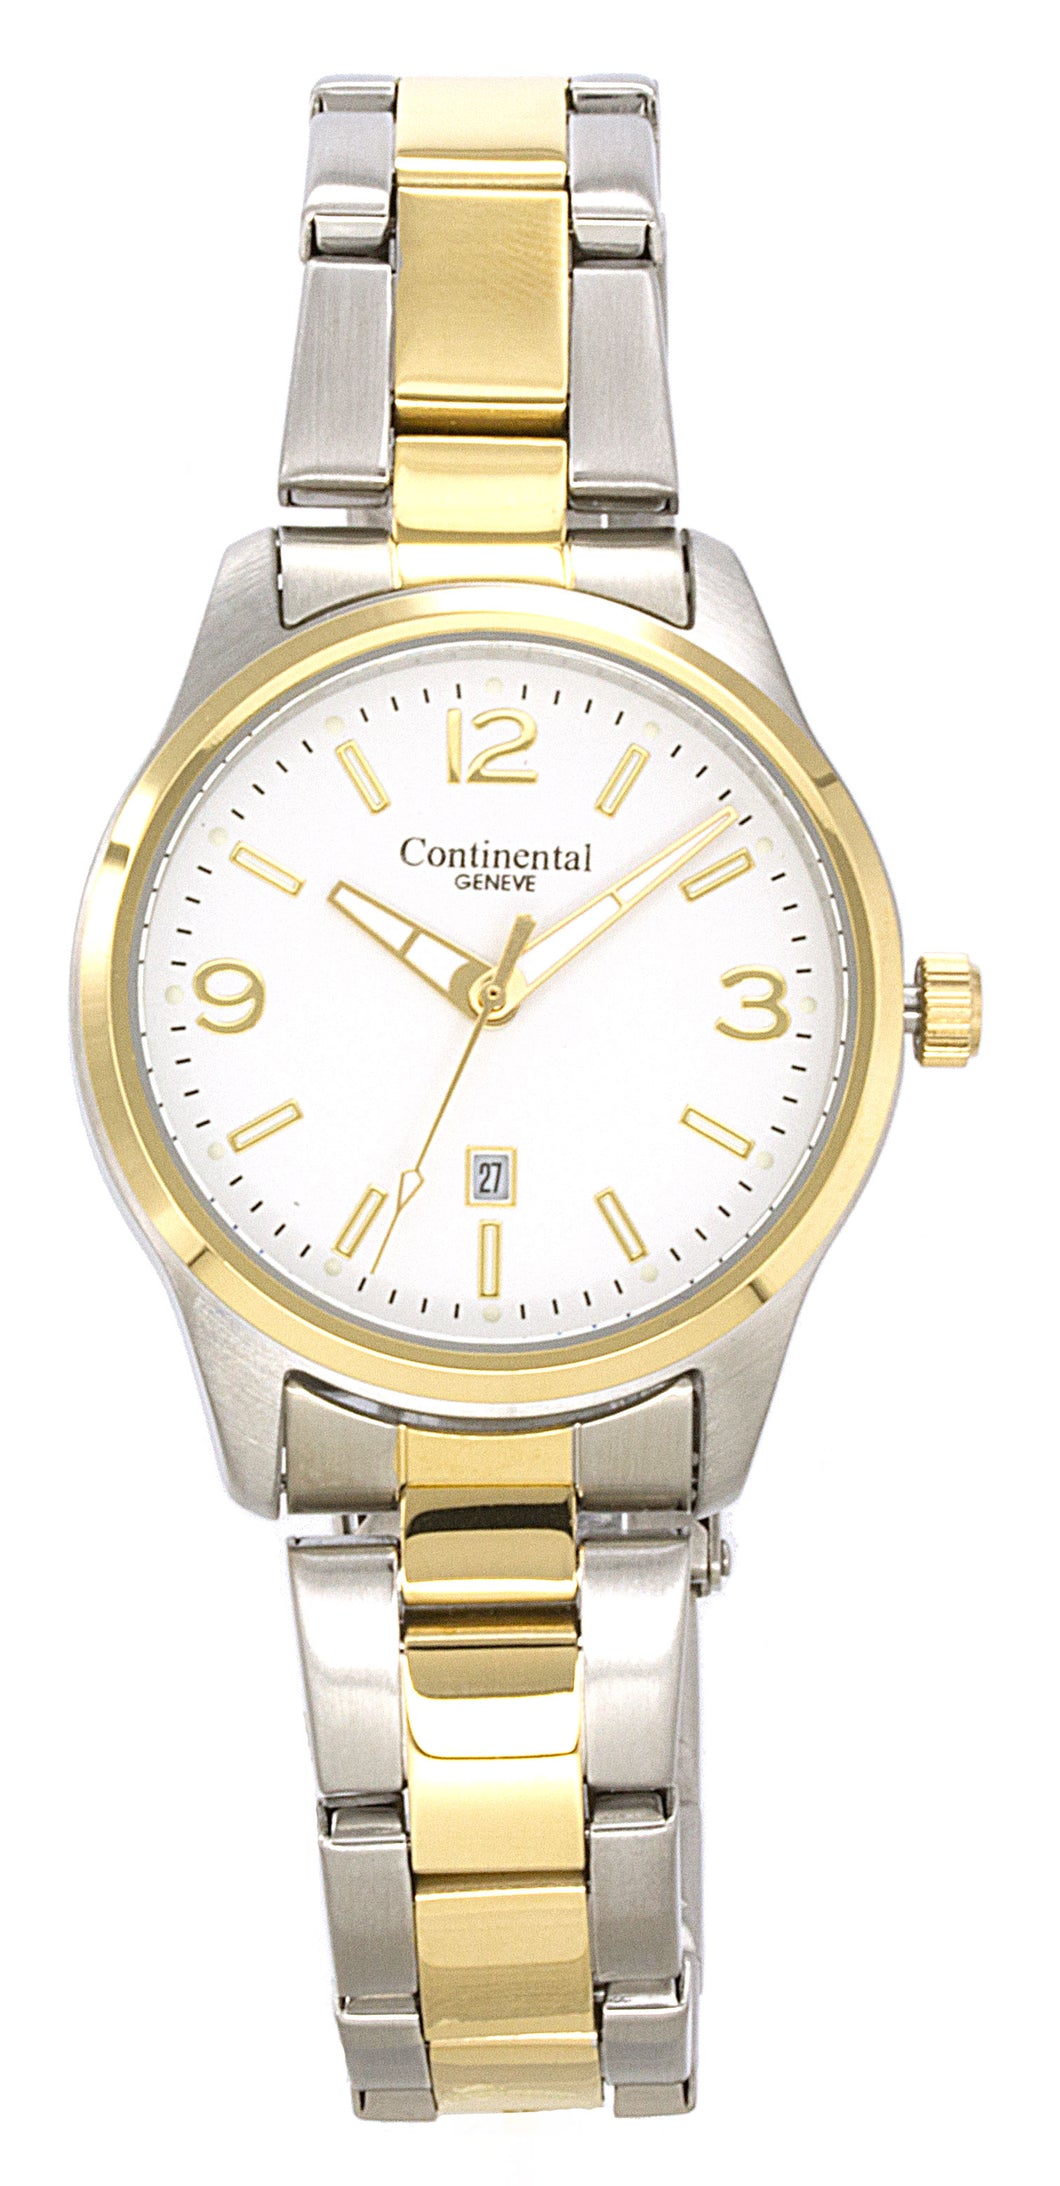 390065 Continental Geneve Two Tone Watch with Date, White Dial